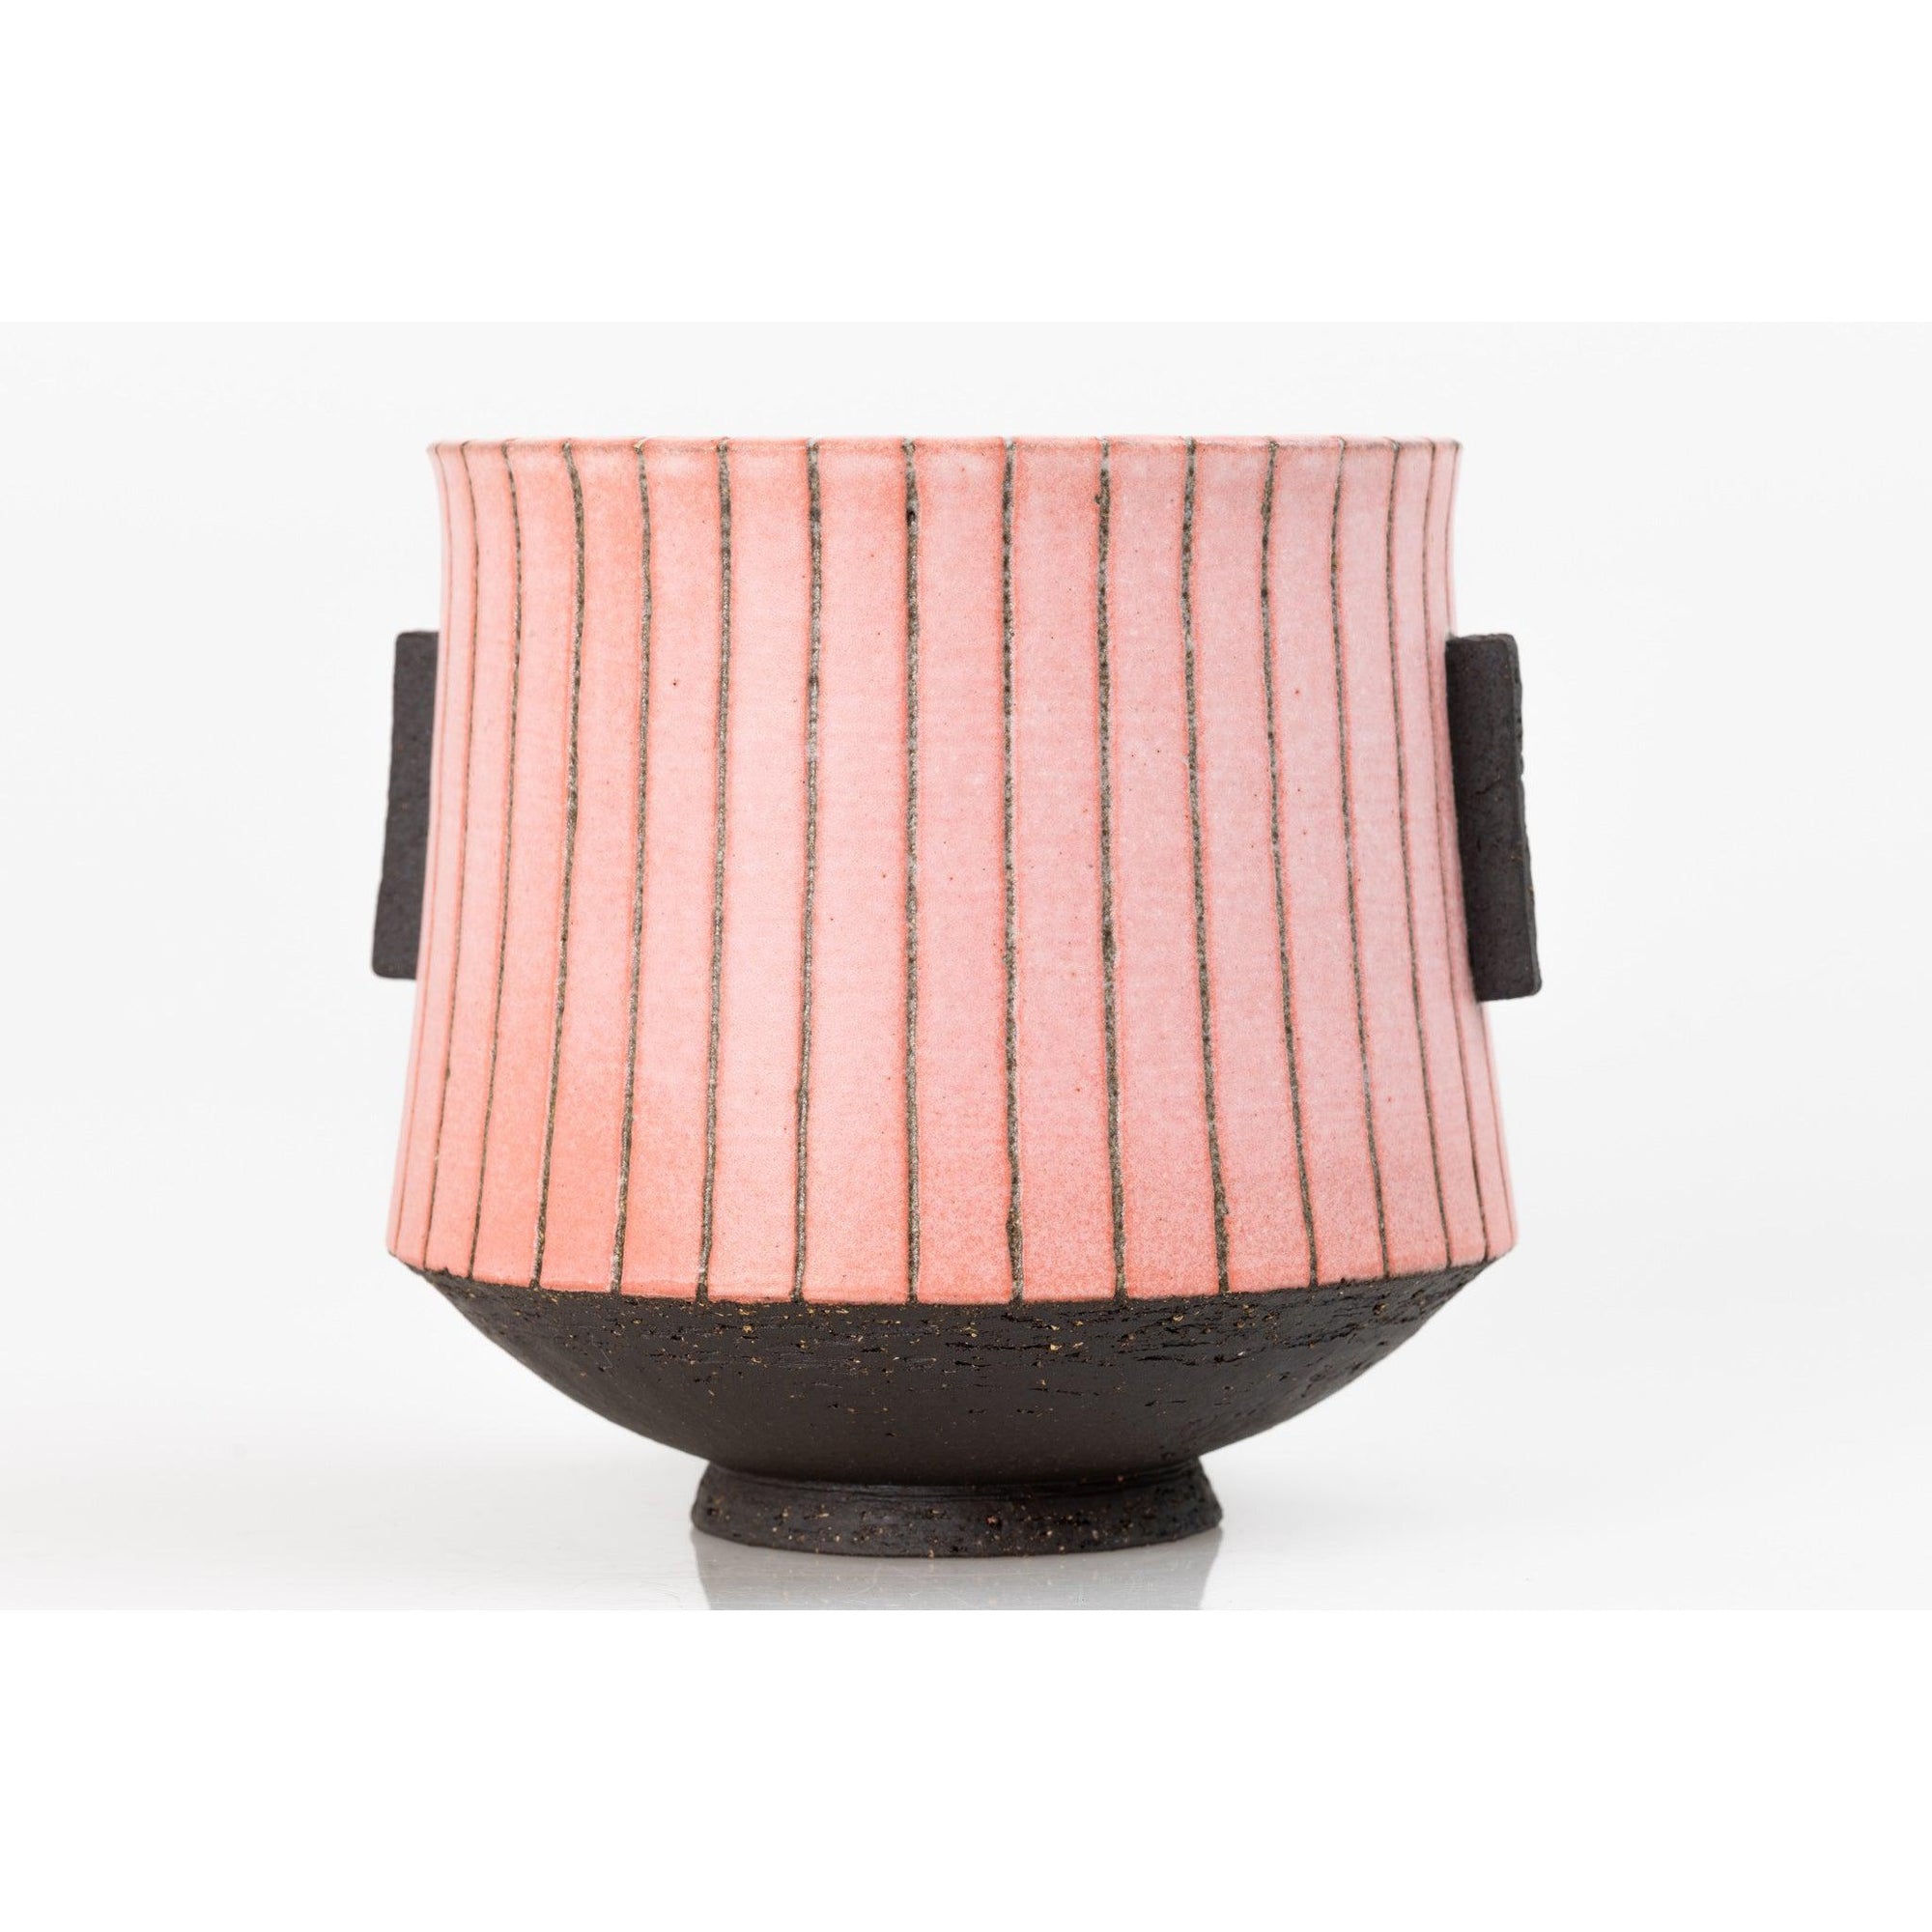 'AP37 Black Stripy Vessel - Red' by Ania Perkowska, available at Padstow Gallery, Cornwall